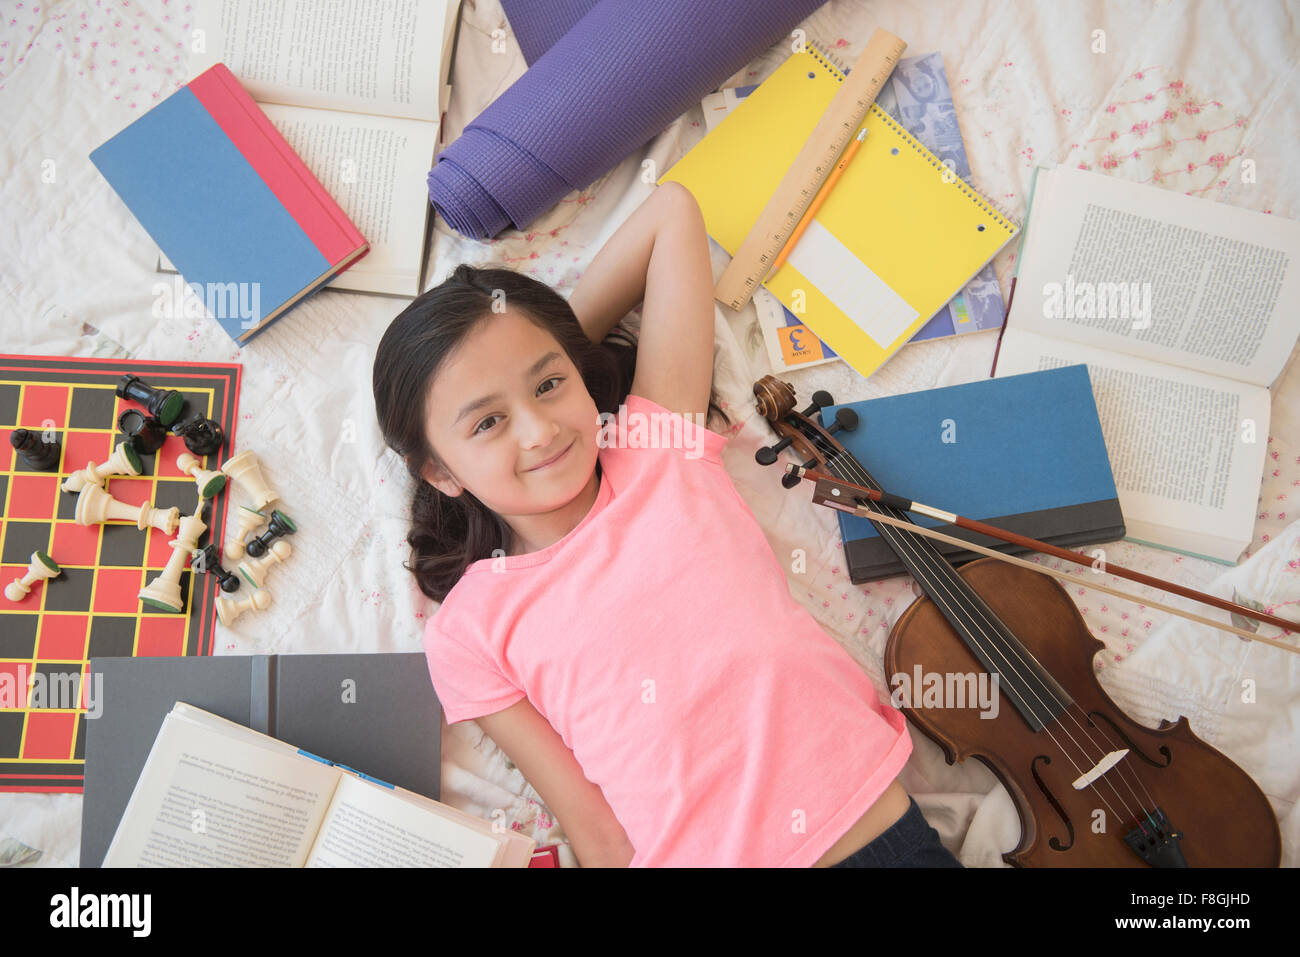 Girl laying on floor with hobbies and homework Stock Photo